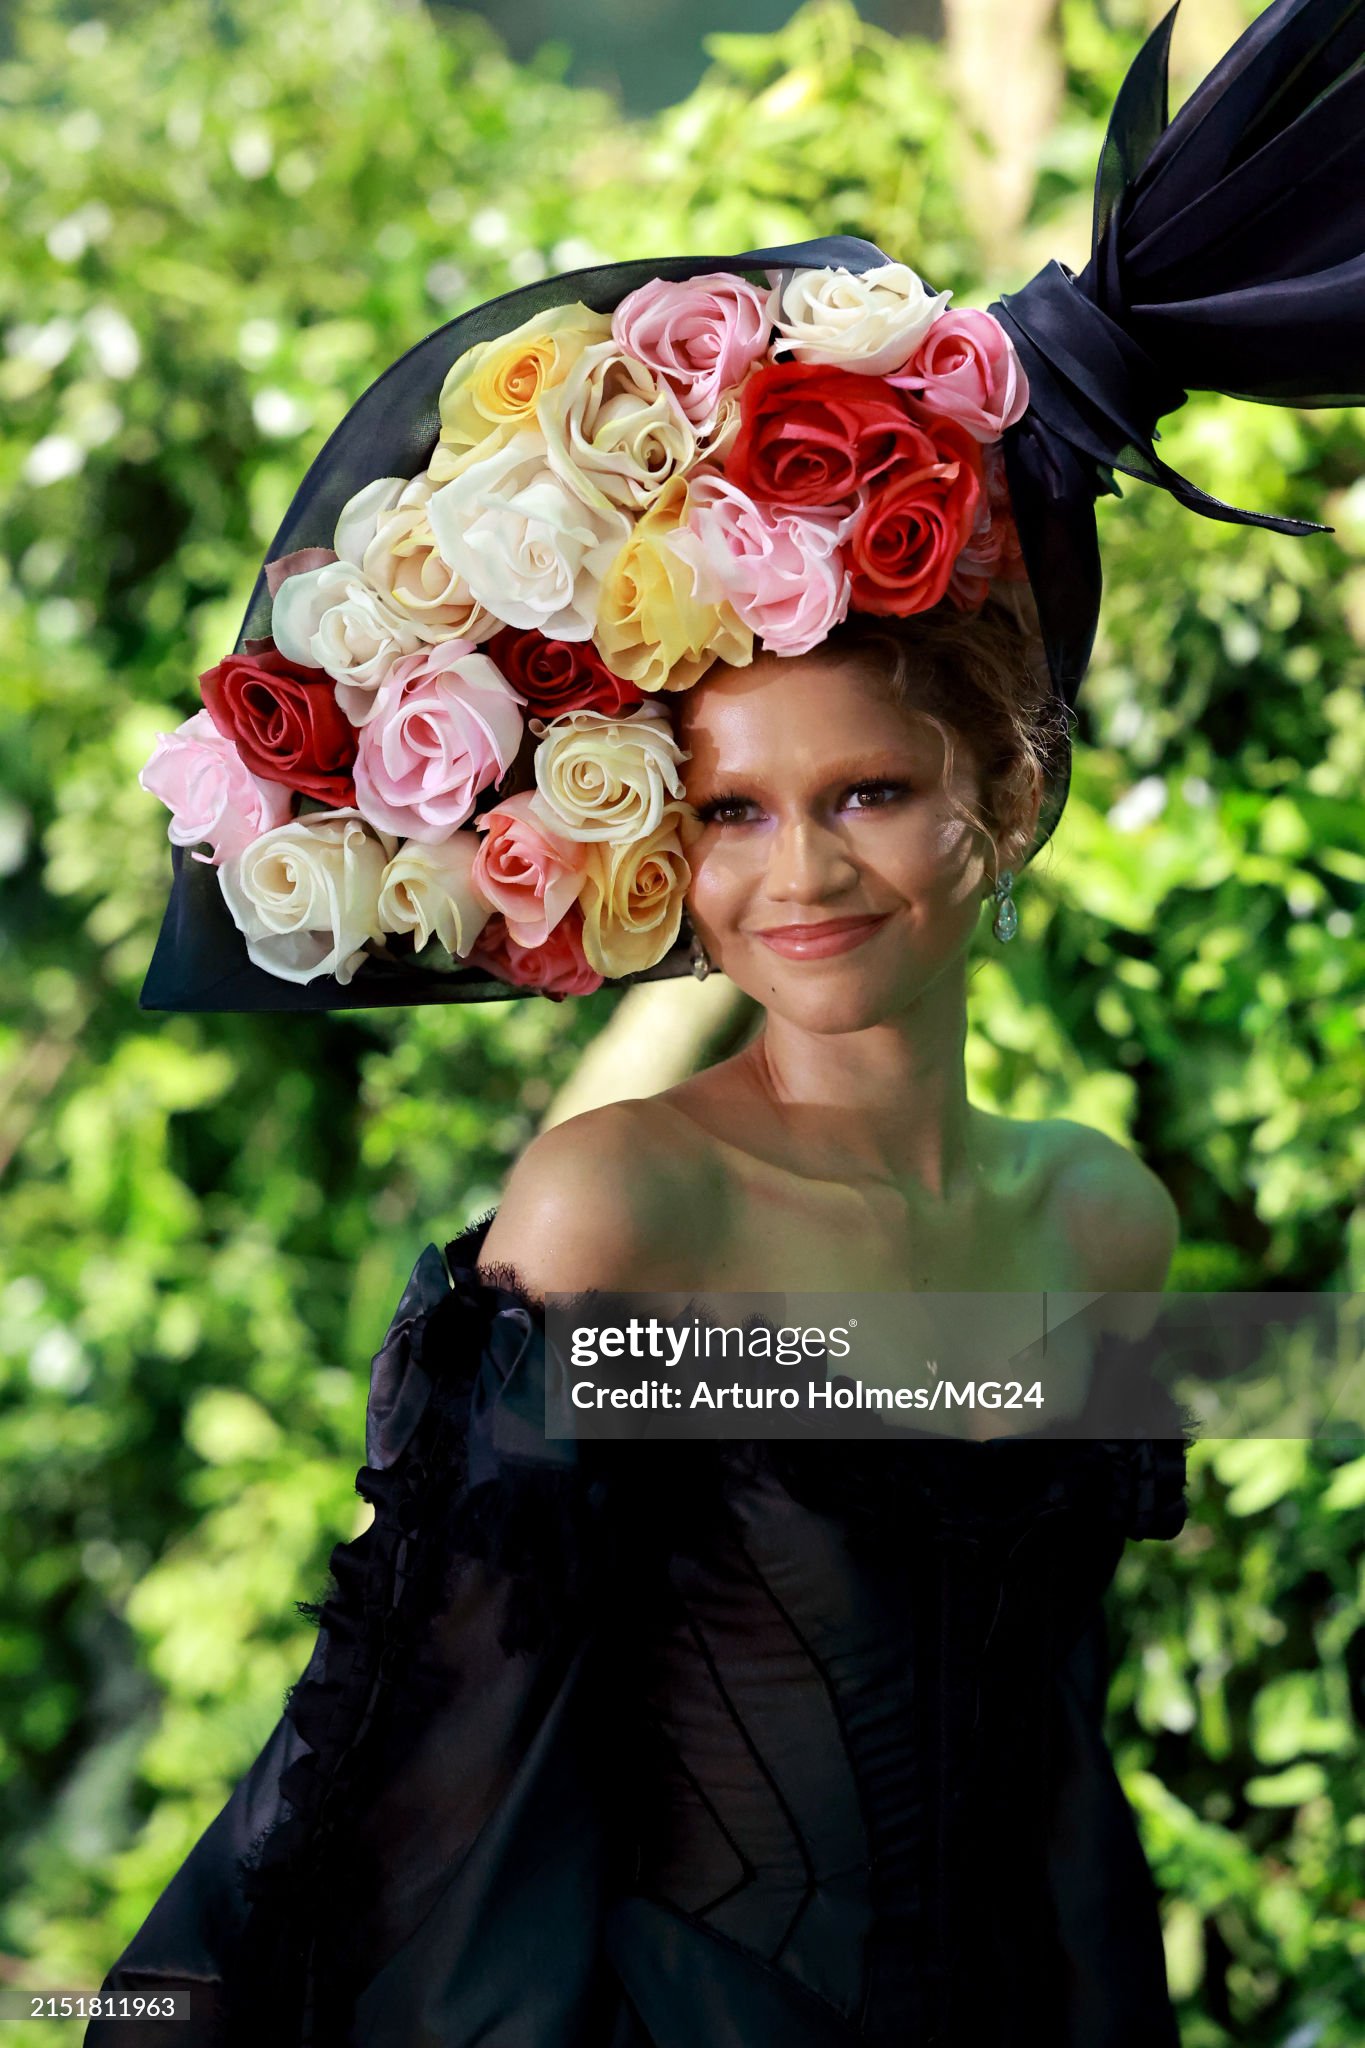 gettyimages-2151811963-2048x2048.jpg